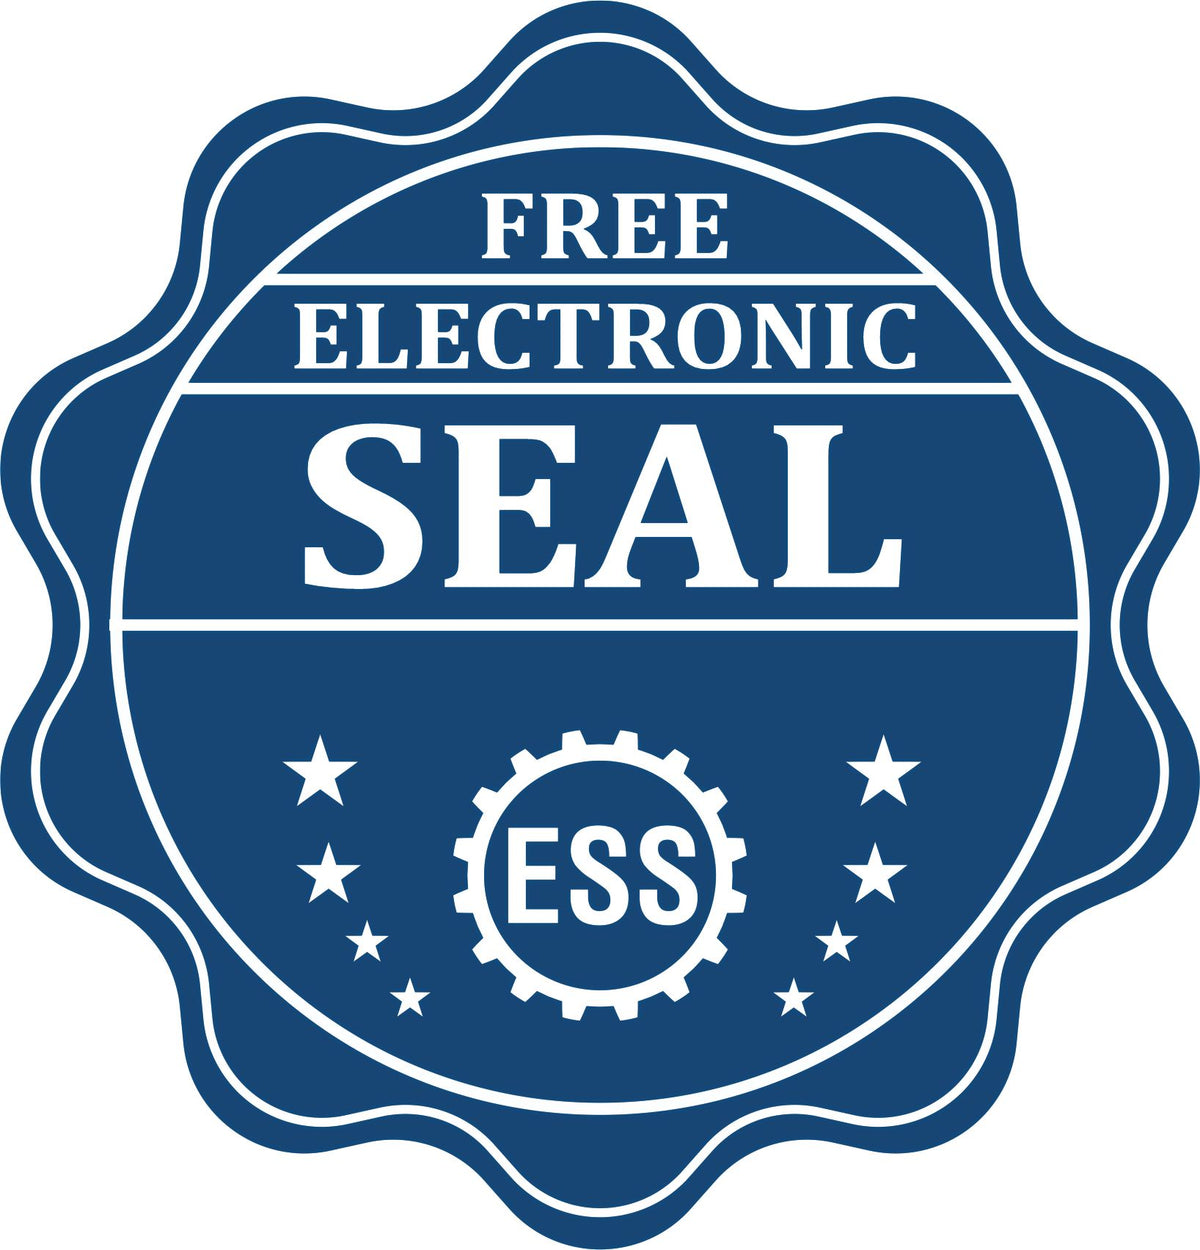 A badge showing a free electronic seal for the State of Massachusetts Soft Land Surveyor Embossing Seal with stars and the ESS gear on the emblem.